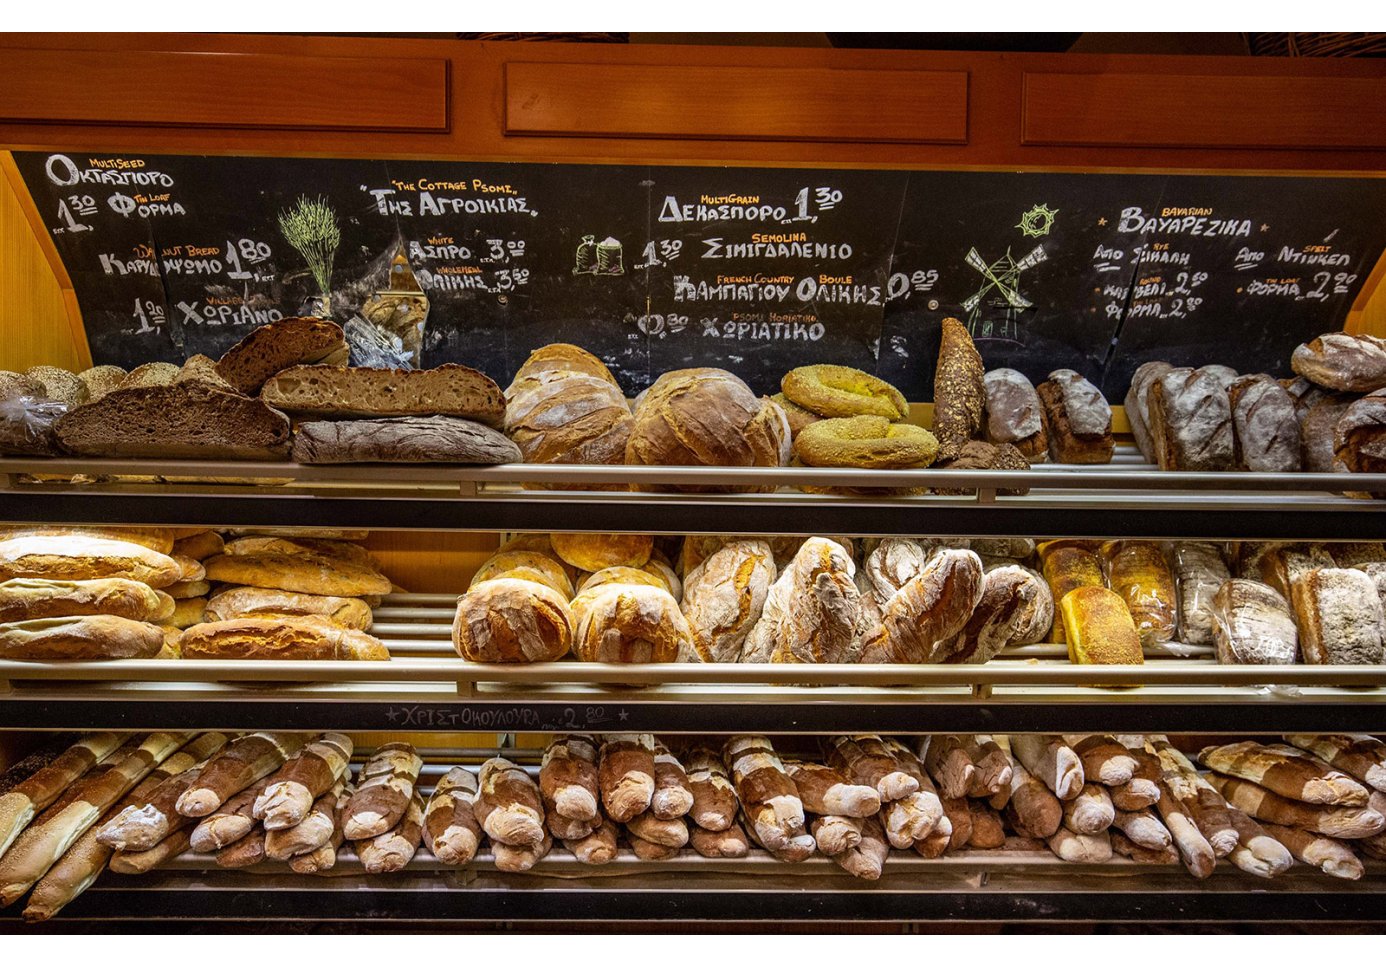 A bakery stand with all sorts of bread